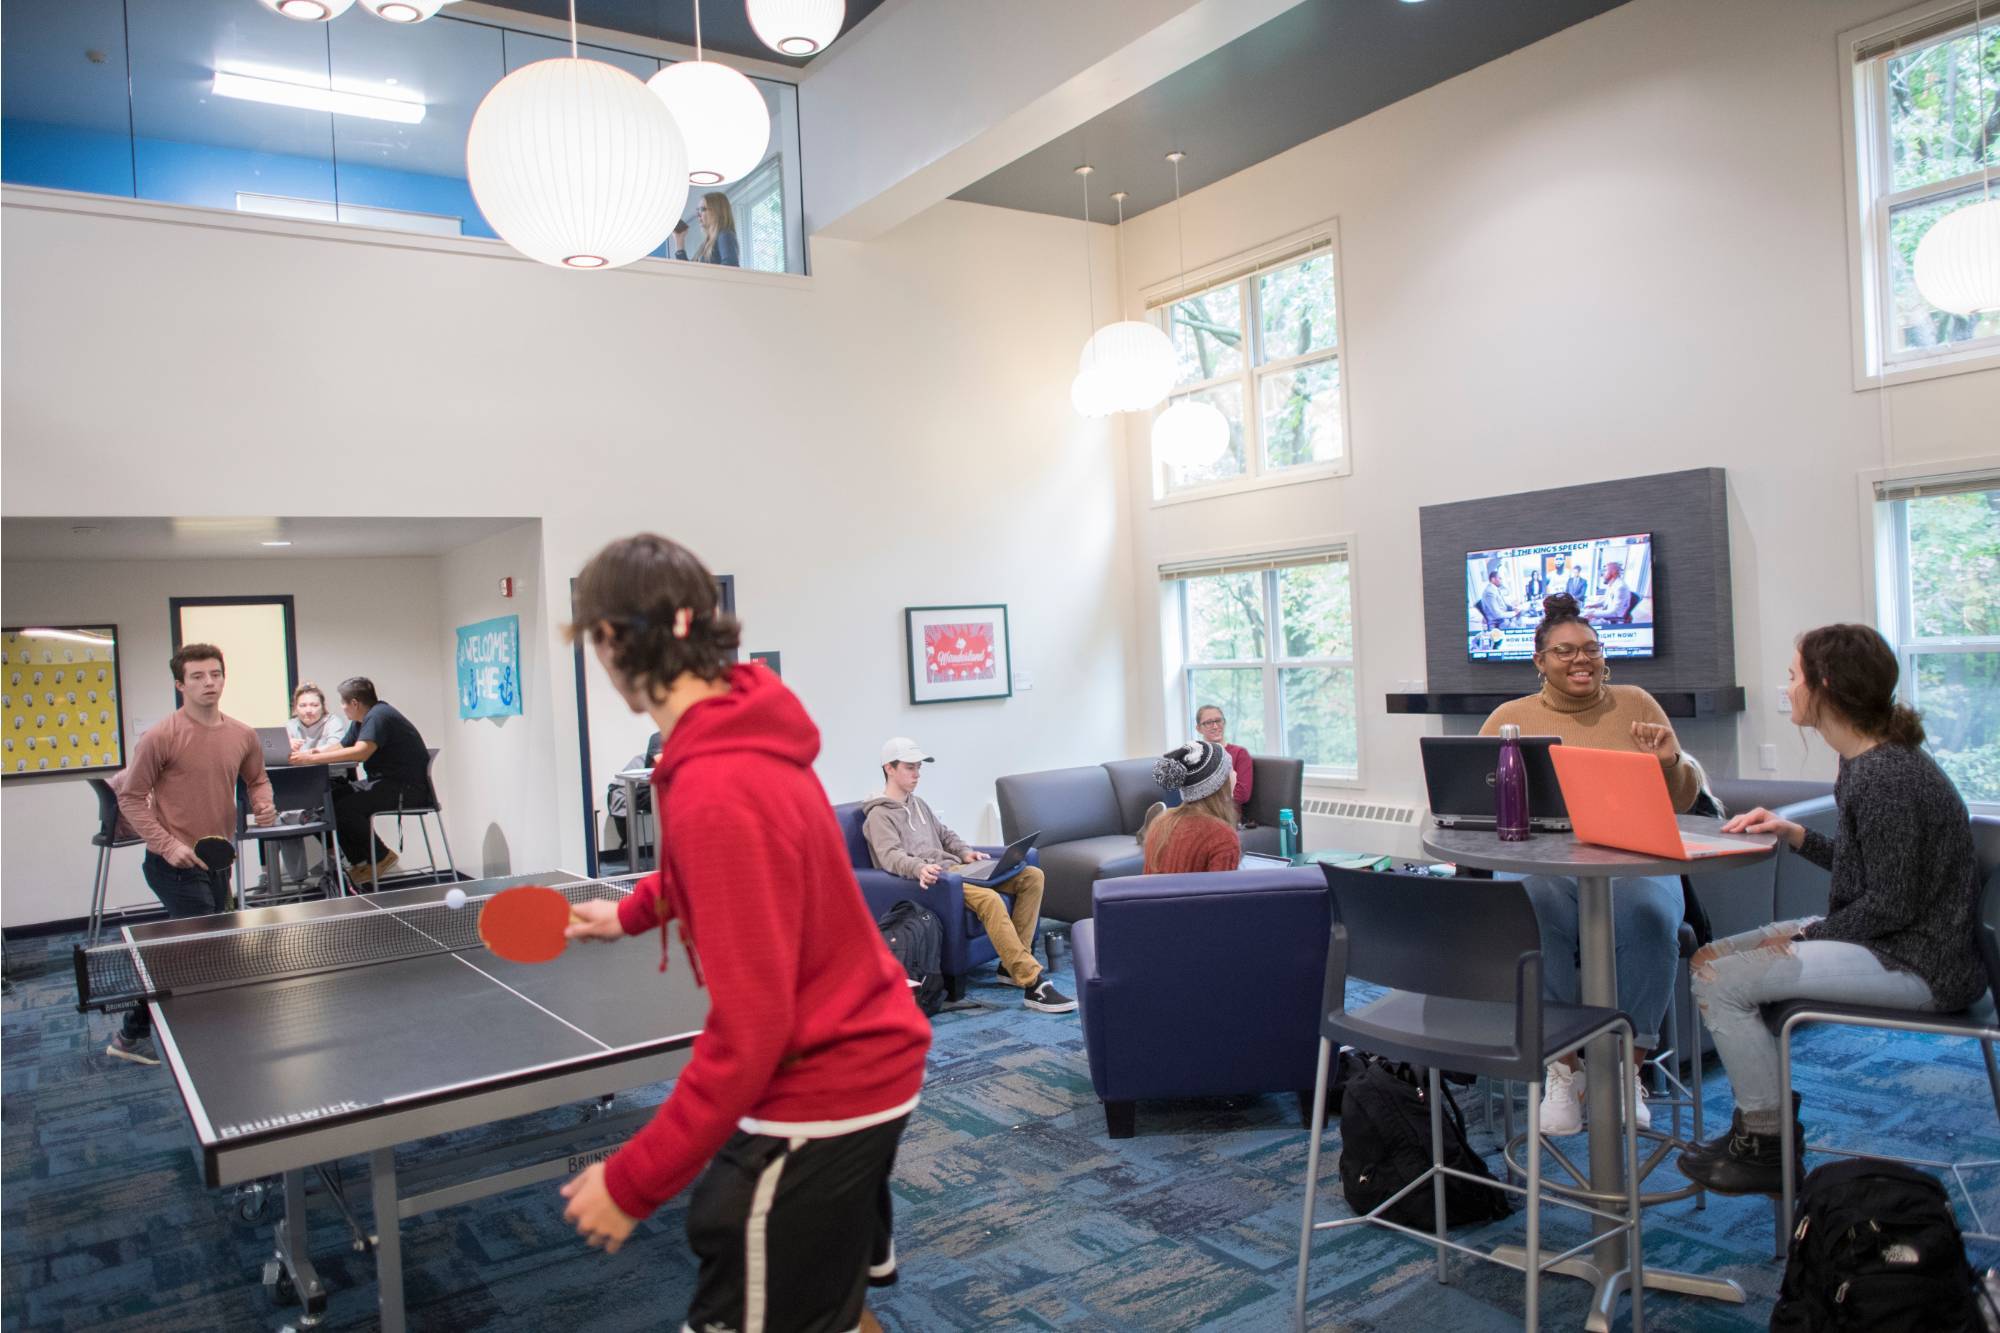 Suite-style housing lounge in Kirkpatrick Living Center.